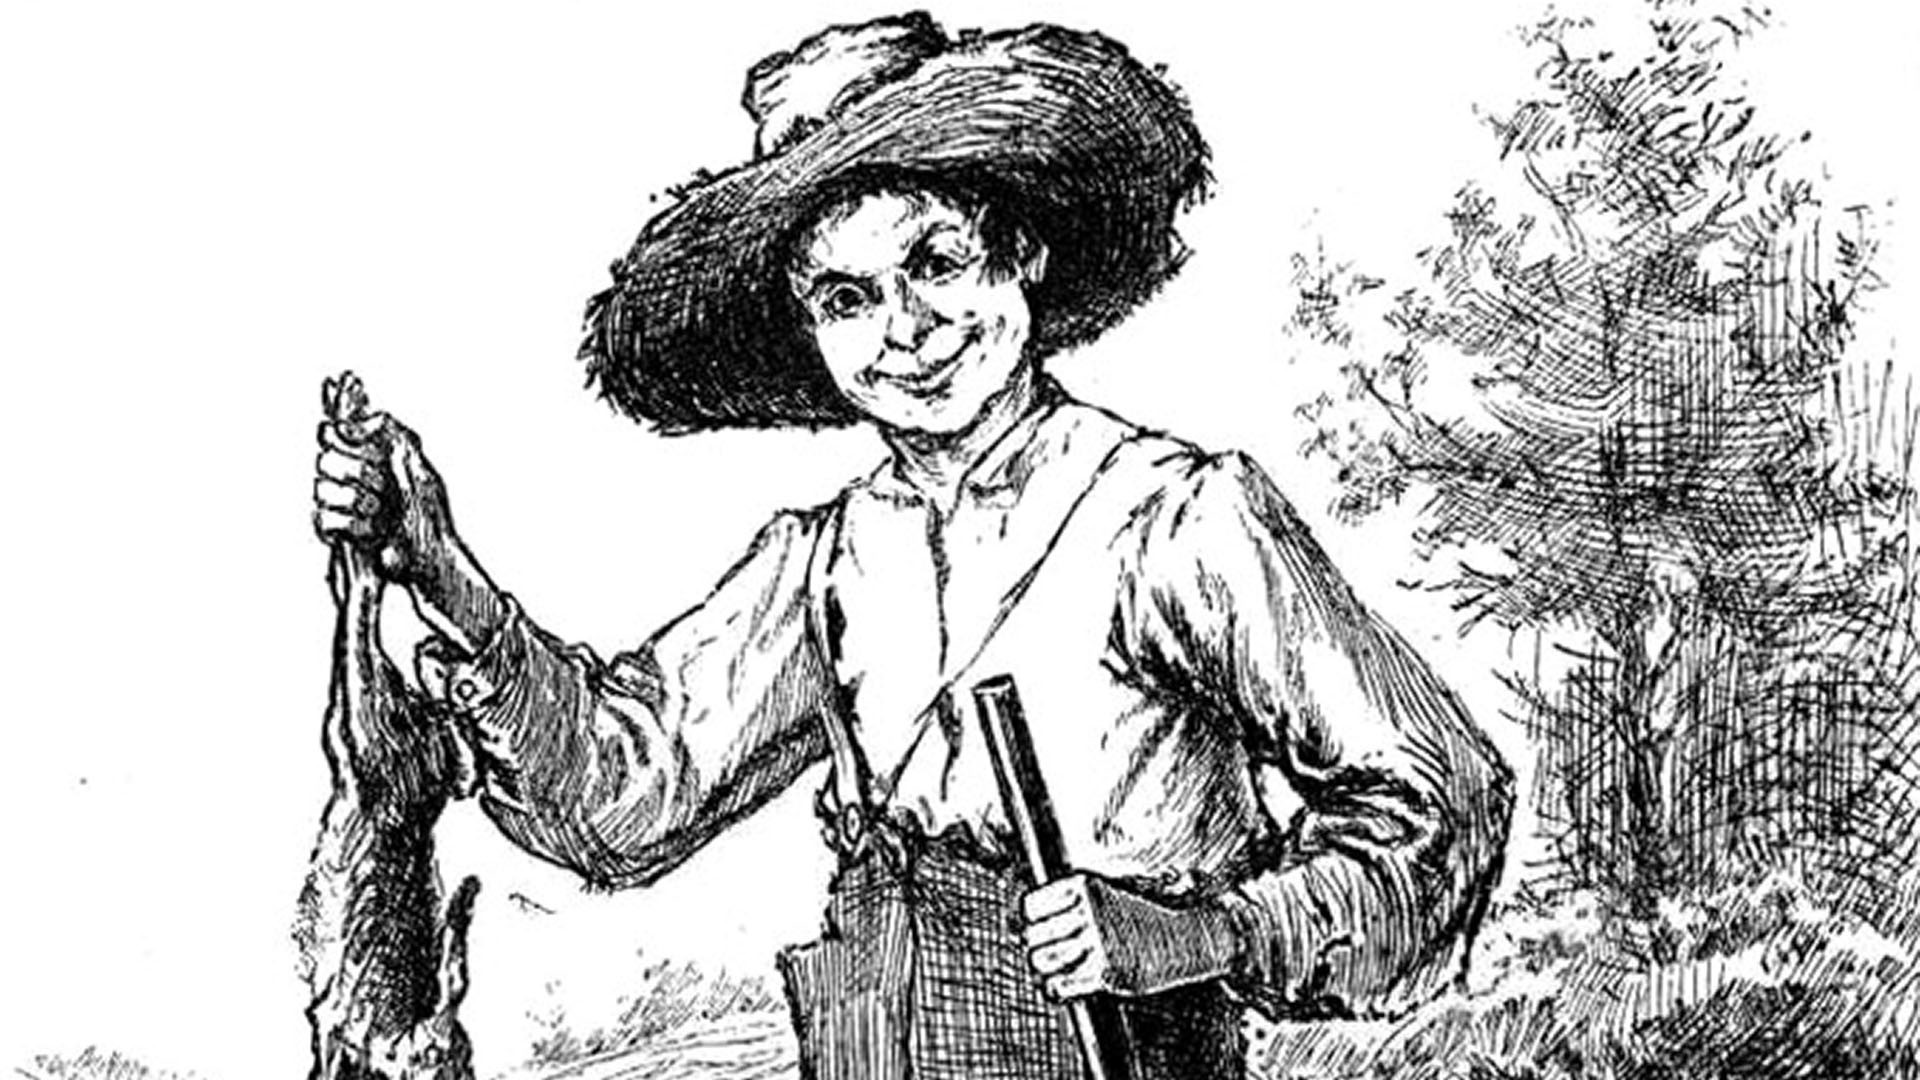 Illustration by E. W. Kemble, from first edition of 'Adventures of Huckleberry Finn,' 1884.